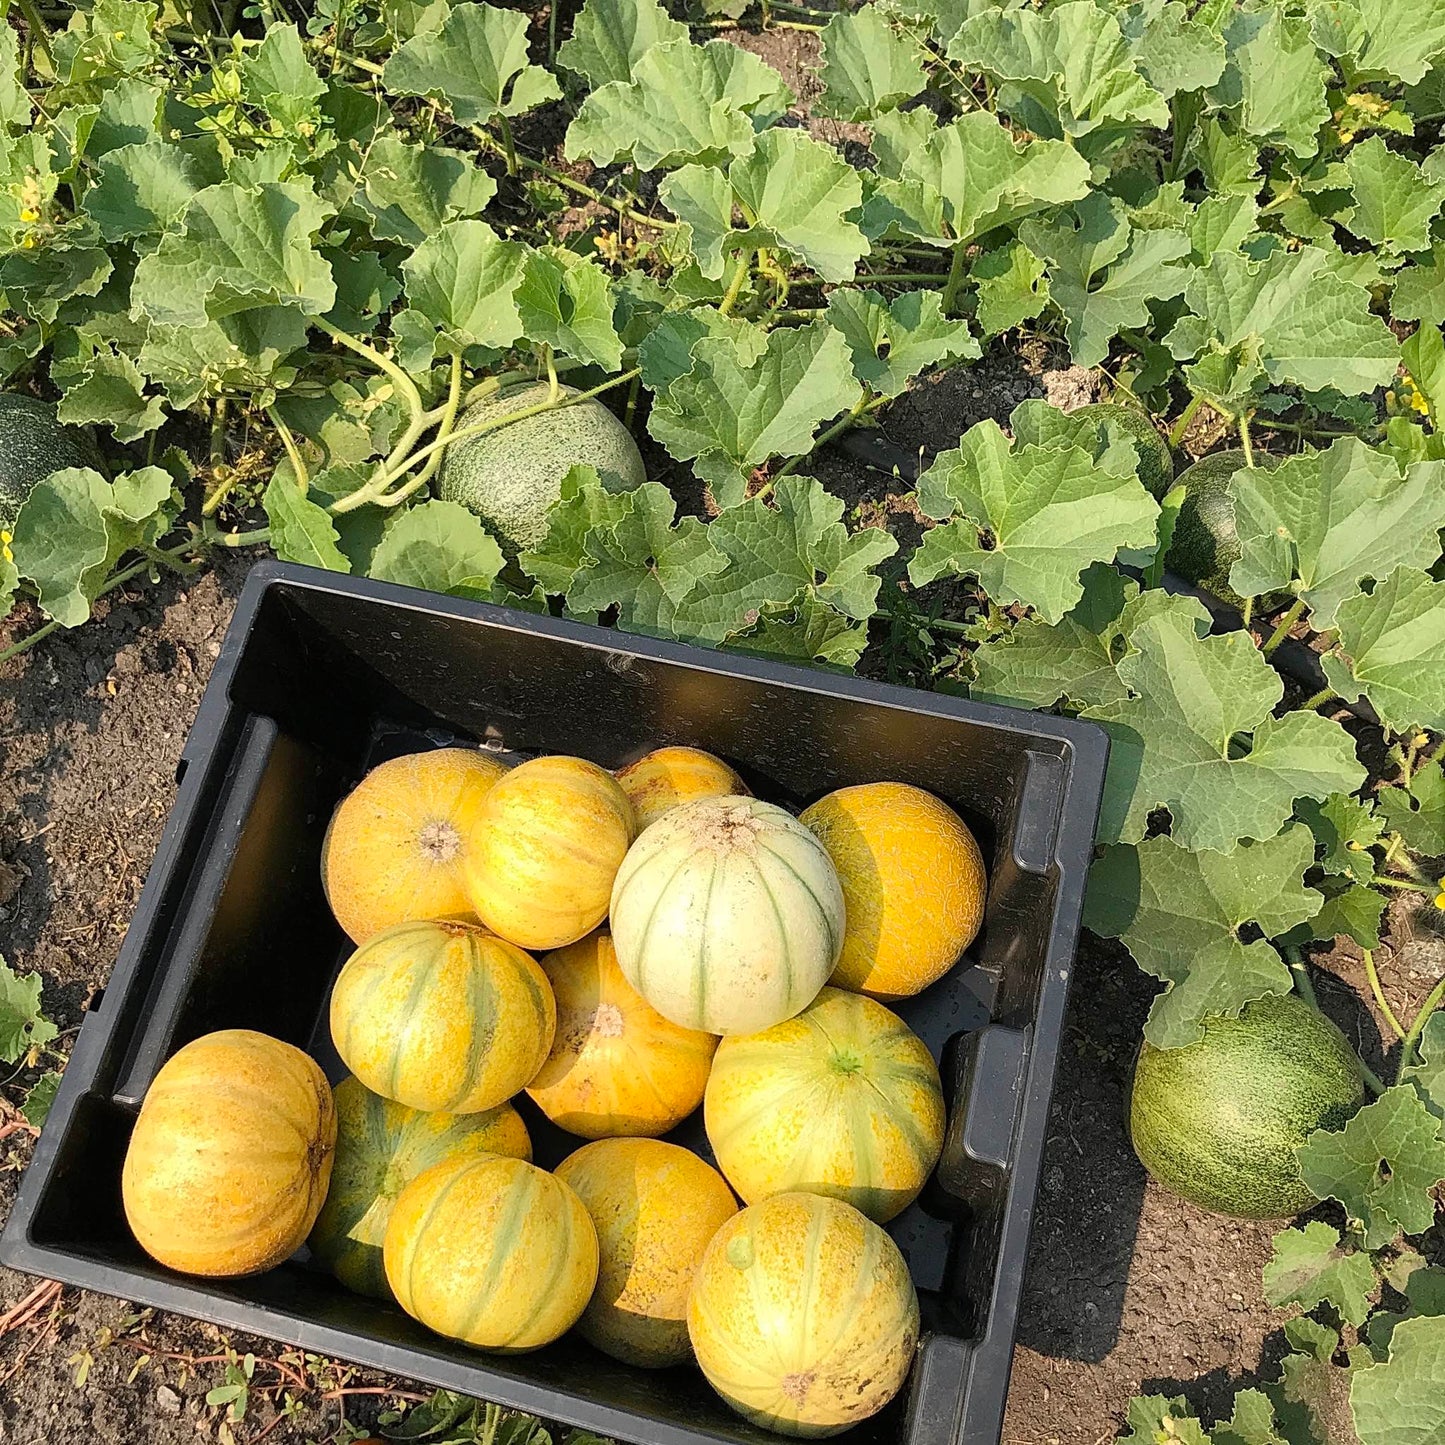 Box of melons in front of the plants they were harvested from.